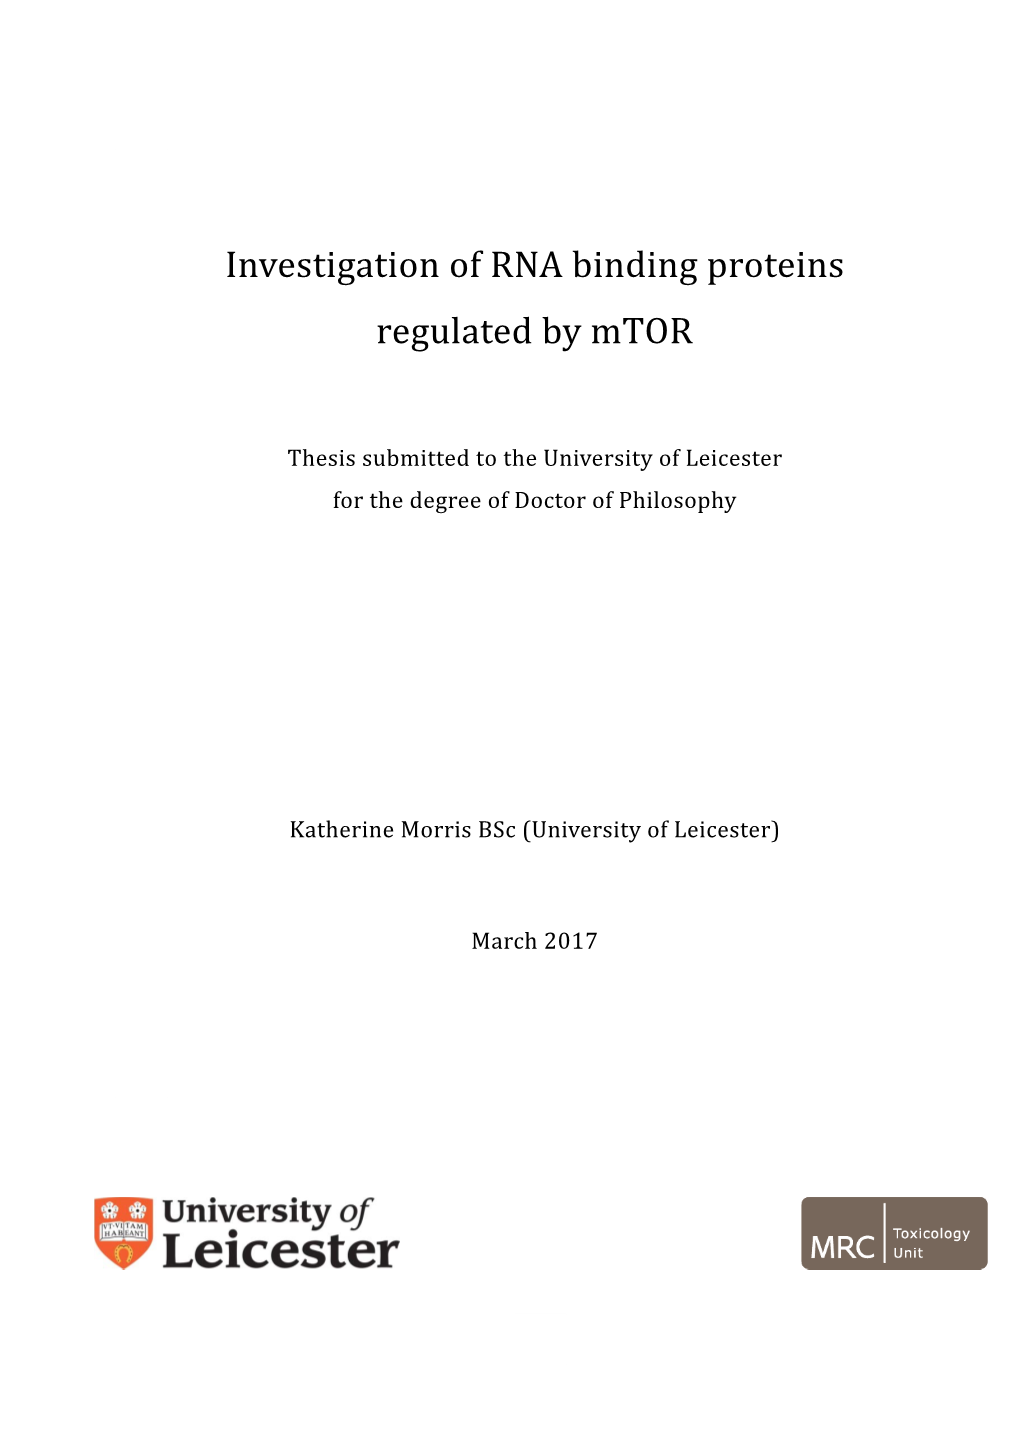 Investigation of RNA Binding Proteins Regulated by Mtor